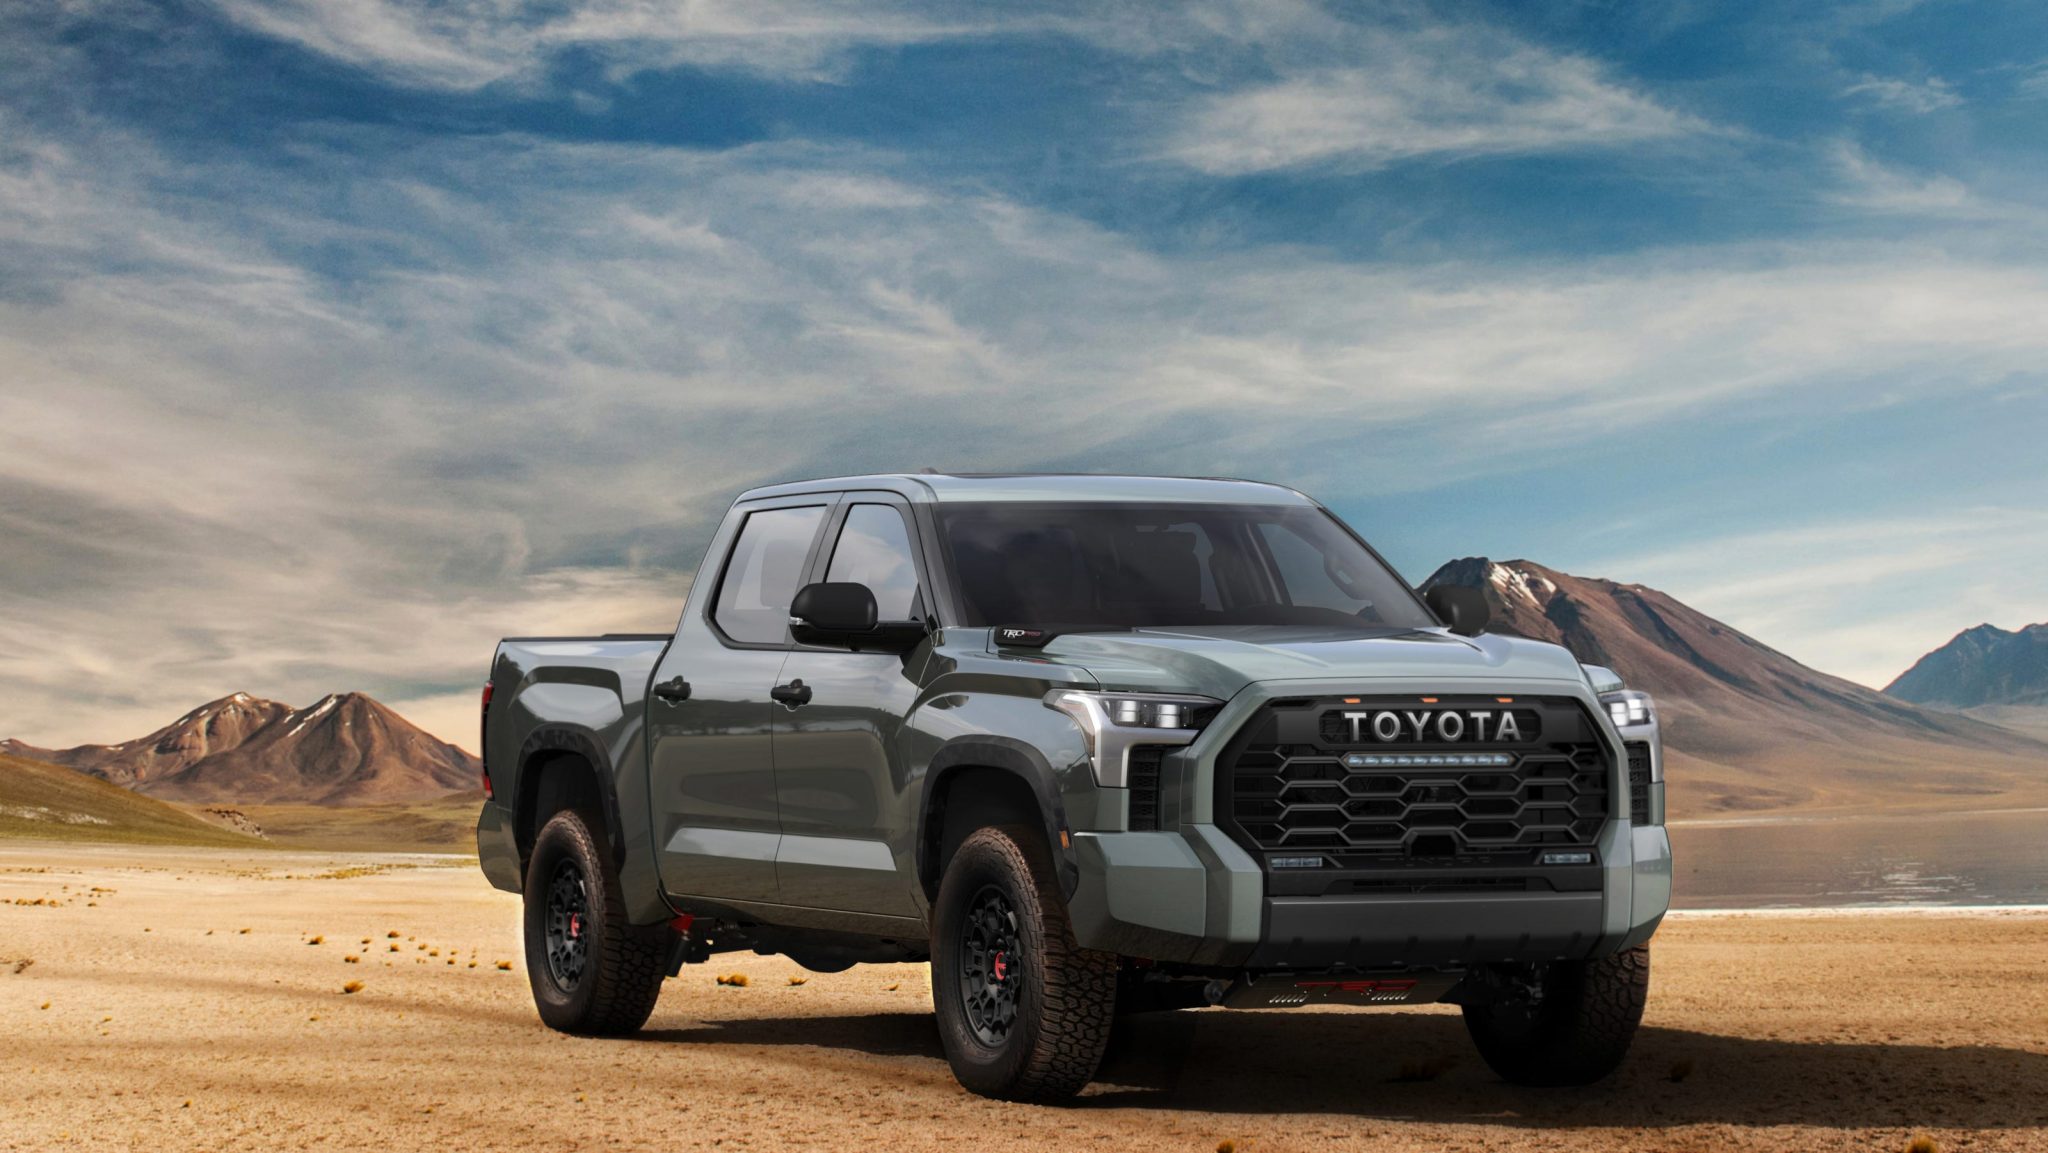 What You Need To Know About Buying A Used Toyota Tundra | Trust Auto